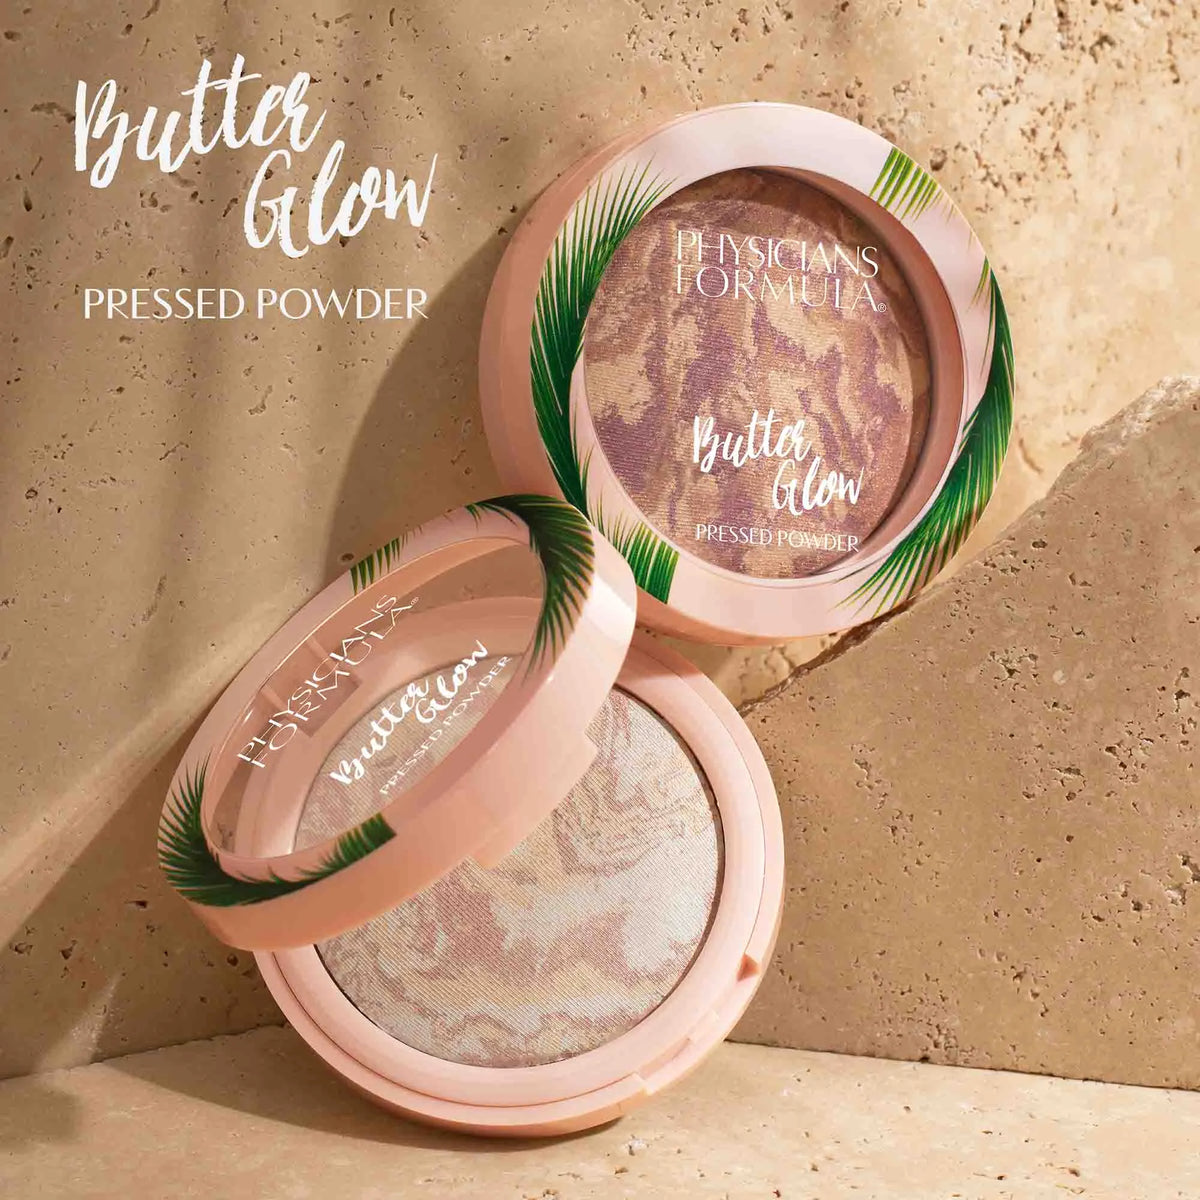 PHYSICIANS FORMULA BUTTER GLOW PRESSED POWDER Face Powder Volare Makeup   